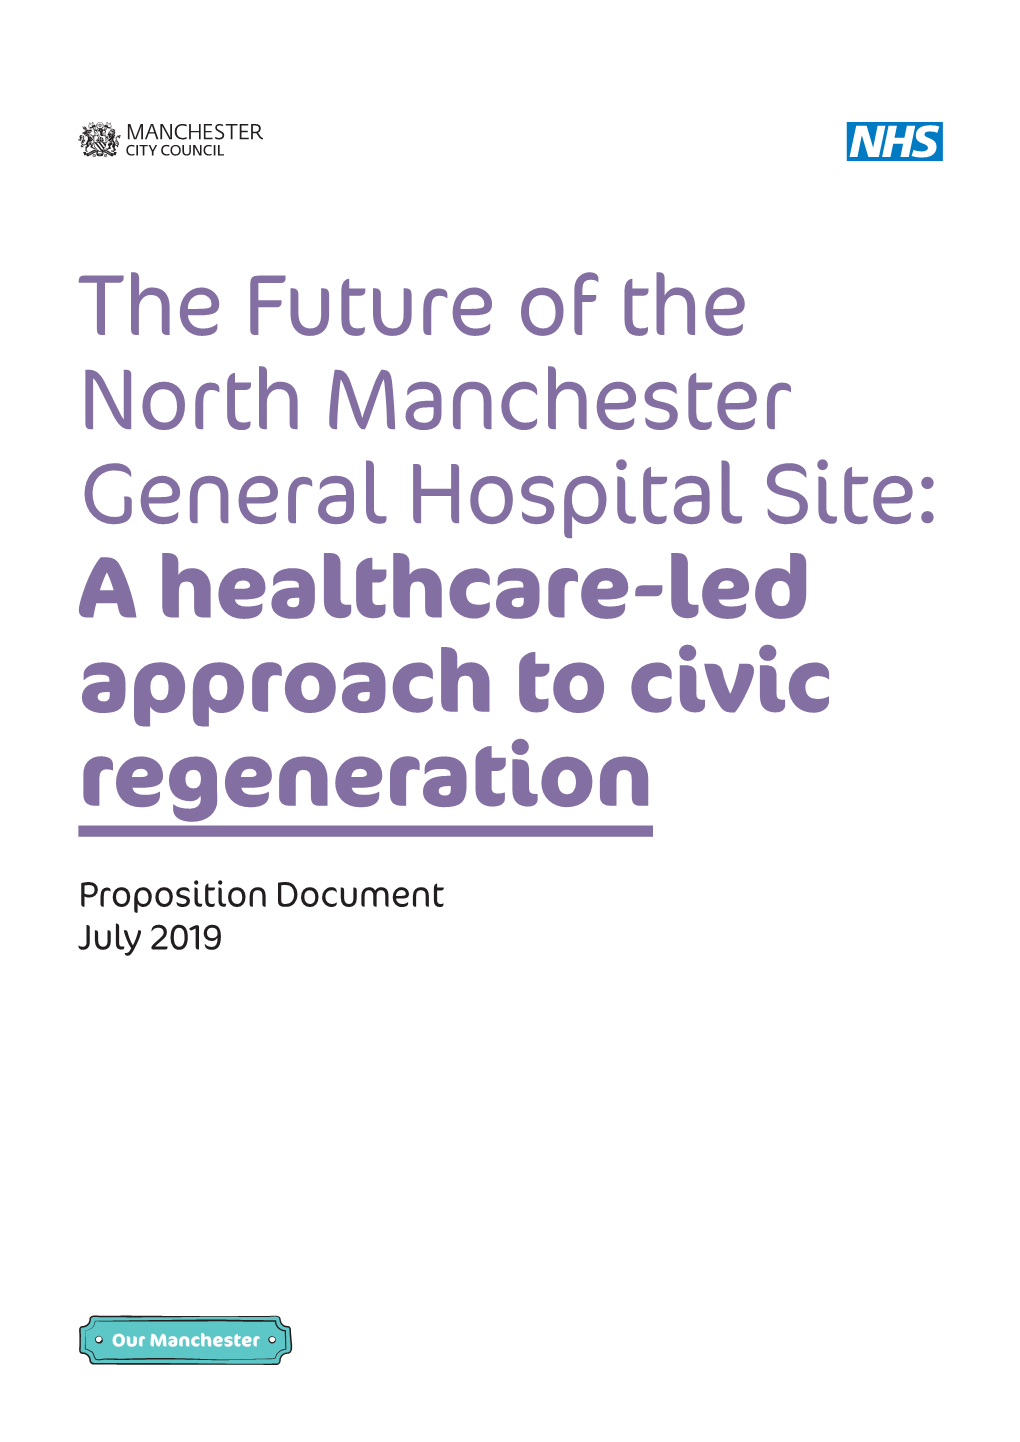 The Future of the North Manchester General Hospital Site: a Healthcare-Led Approach to Civic Regeneration